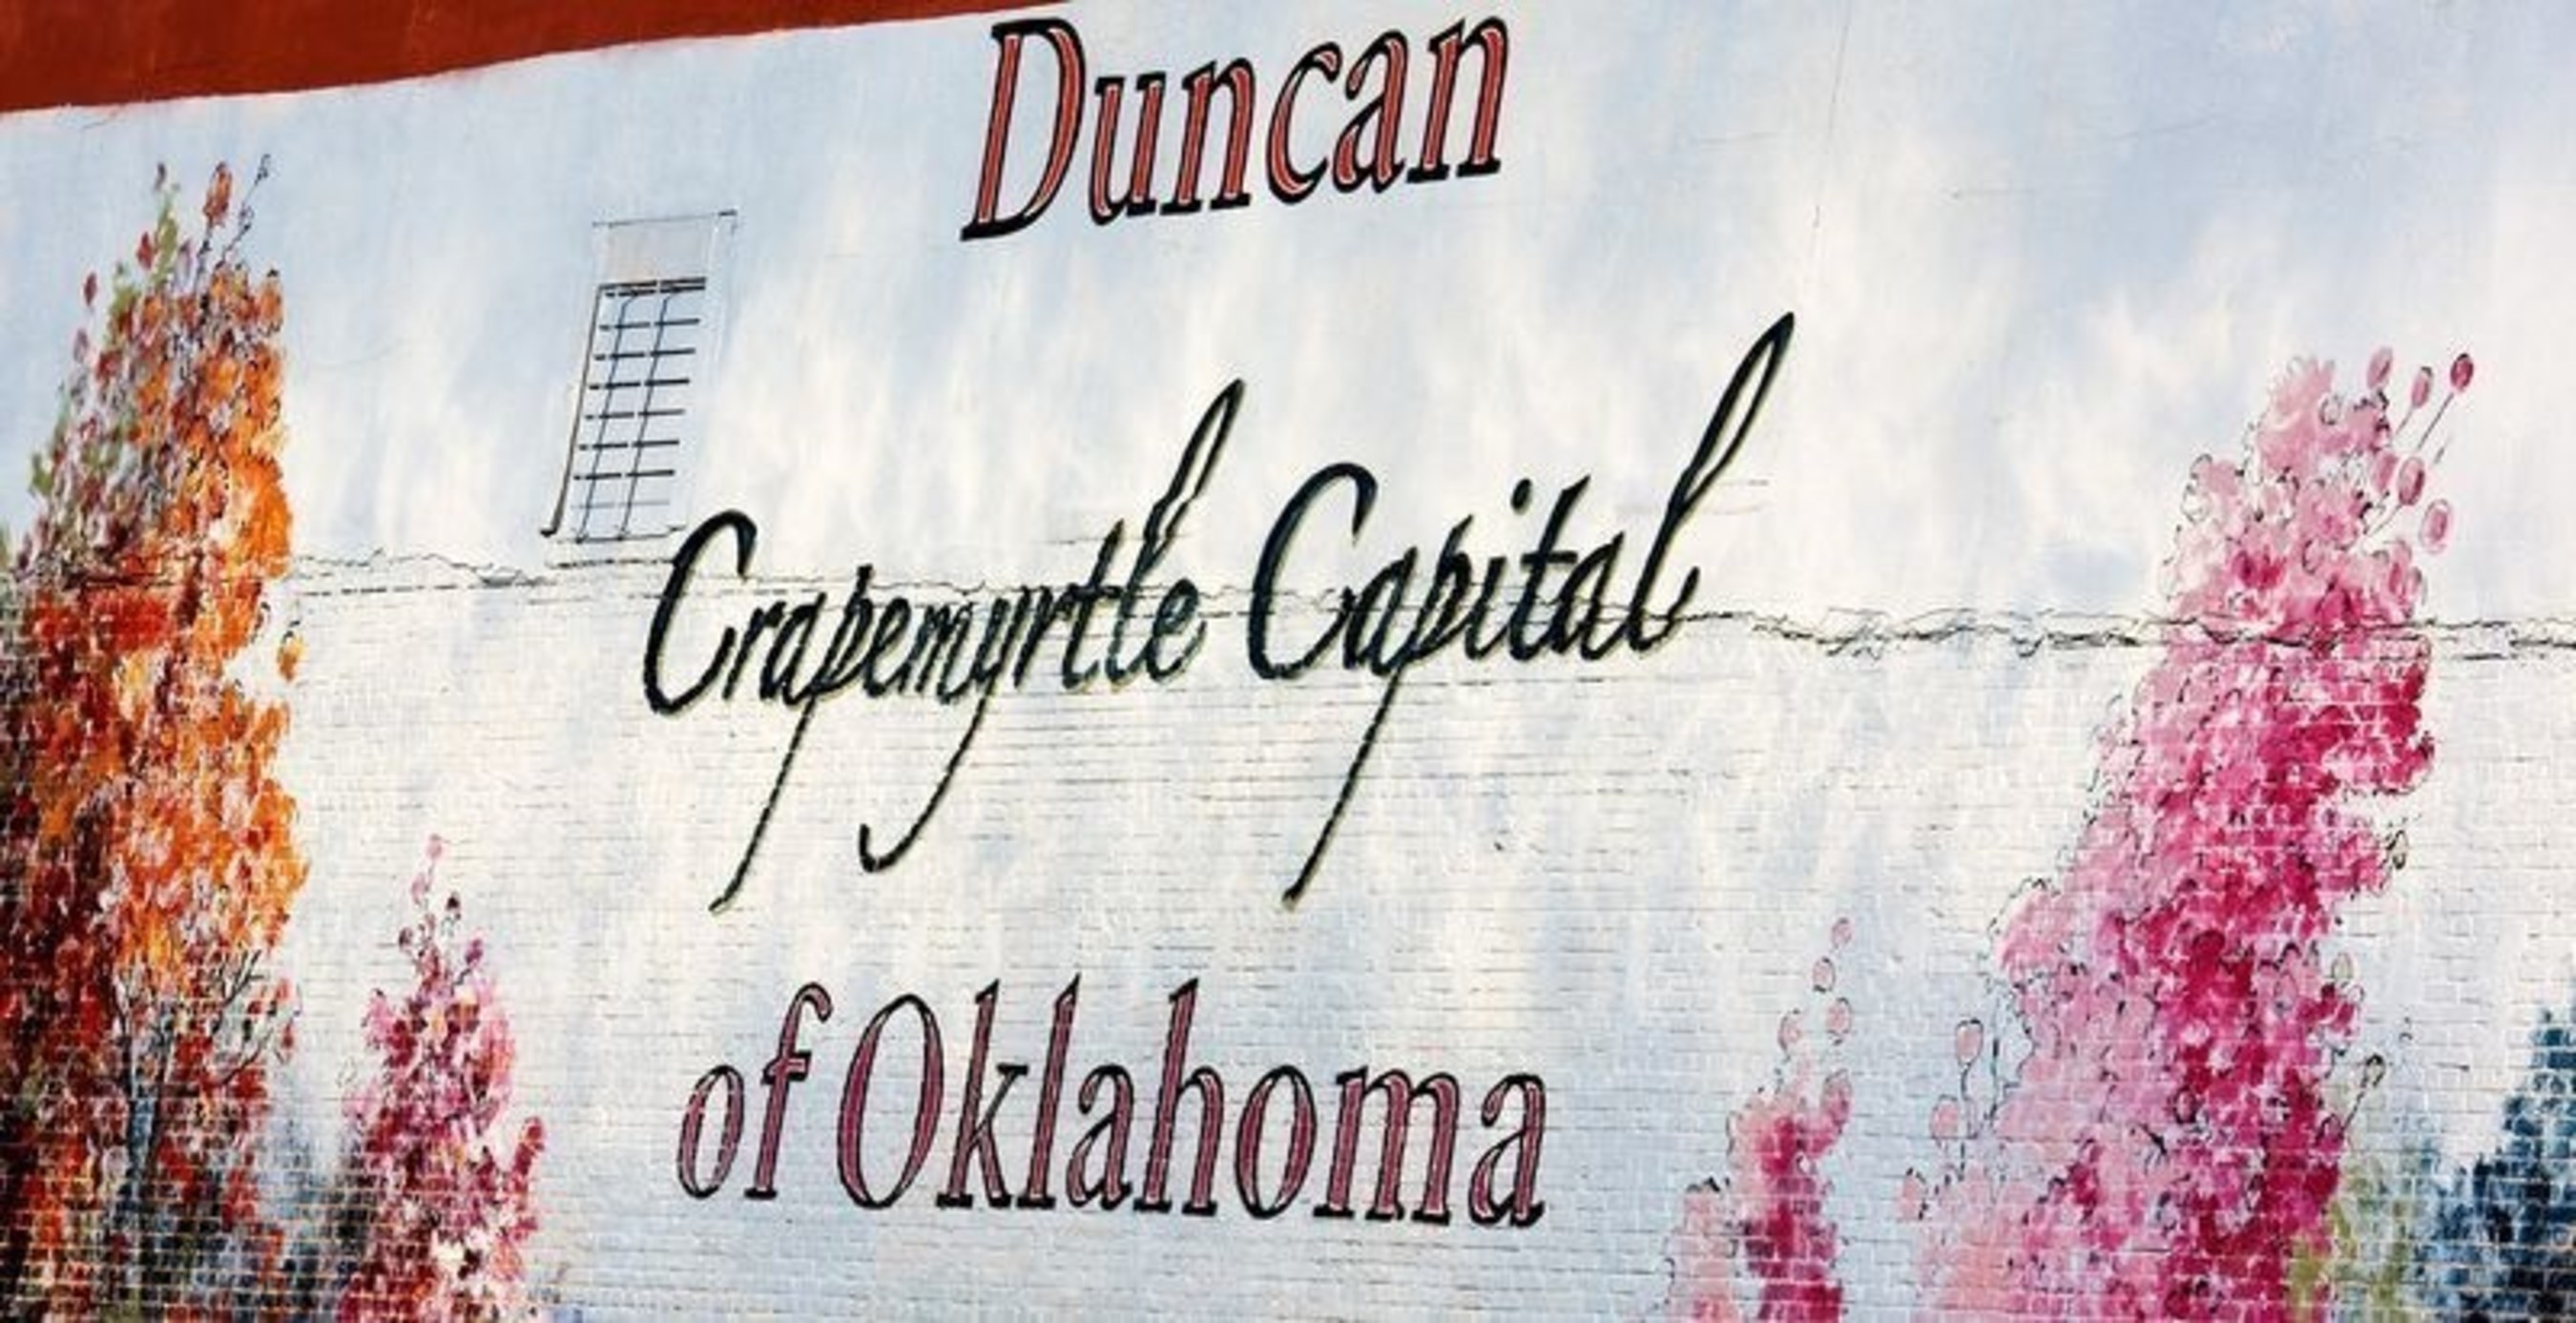 The City of Duncan extended a contract with CH2M to provide operations management services for the City's wastewater treatment facility during the next 10.5 years.